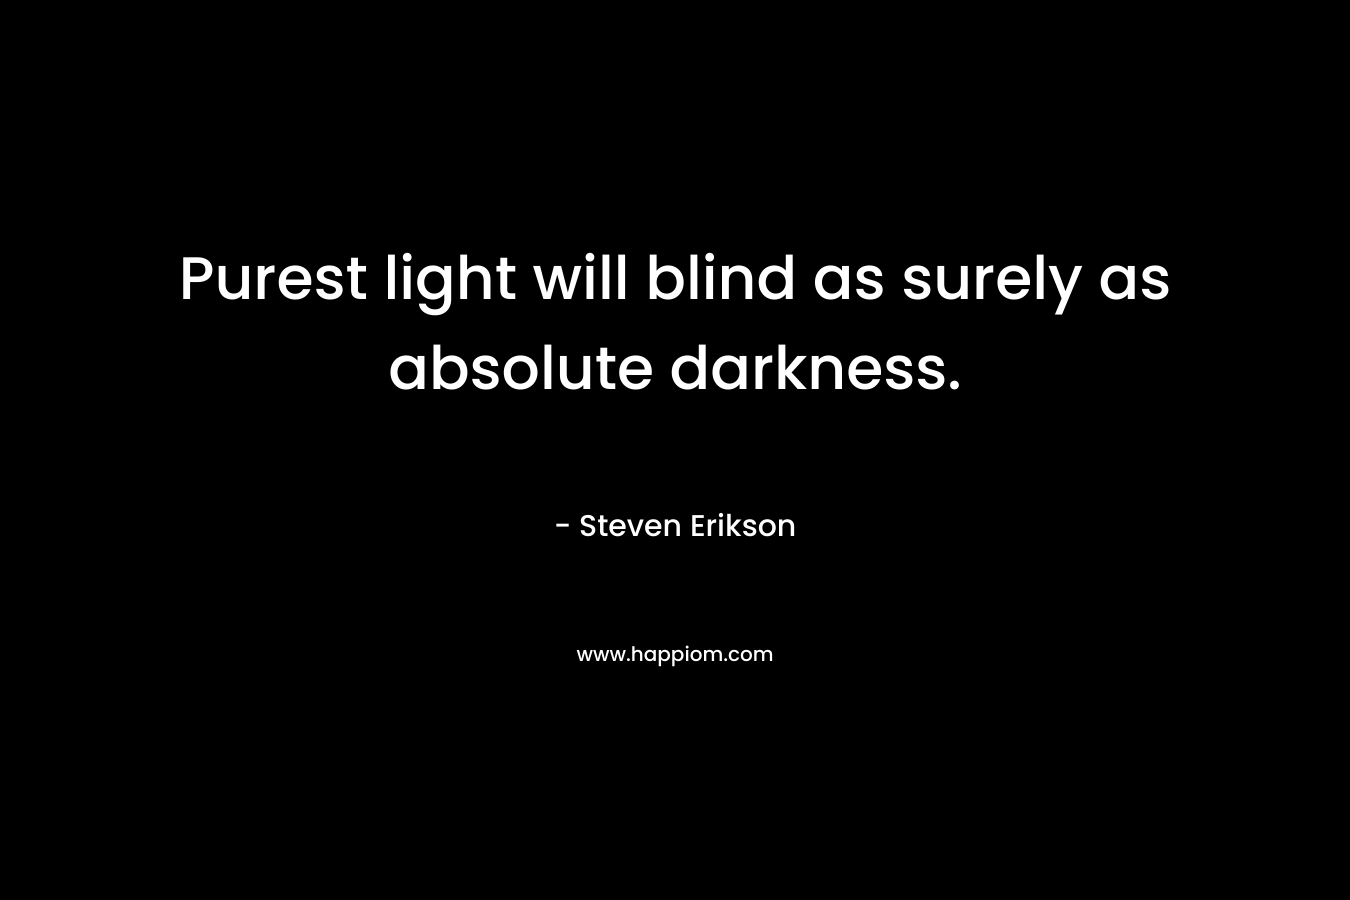 Purest light will blind as surely as absolute darkness.